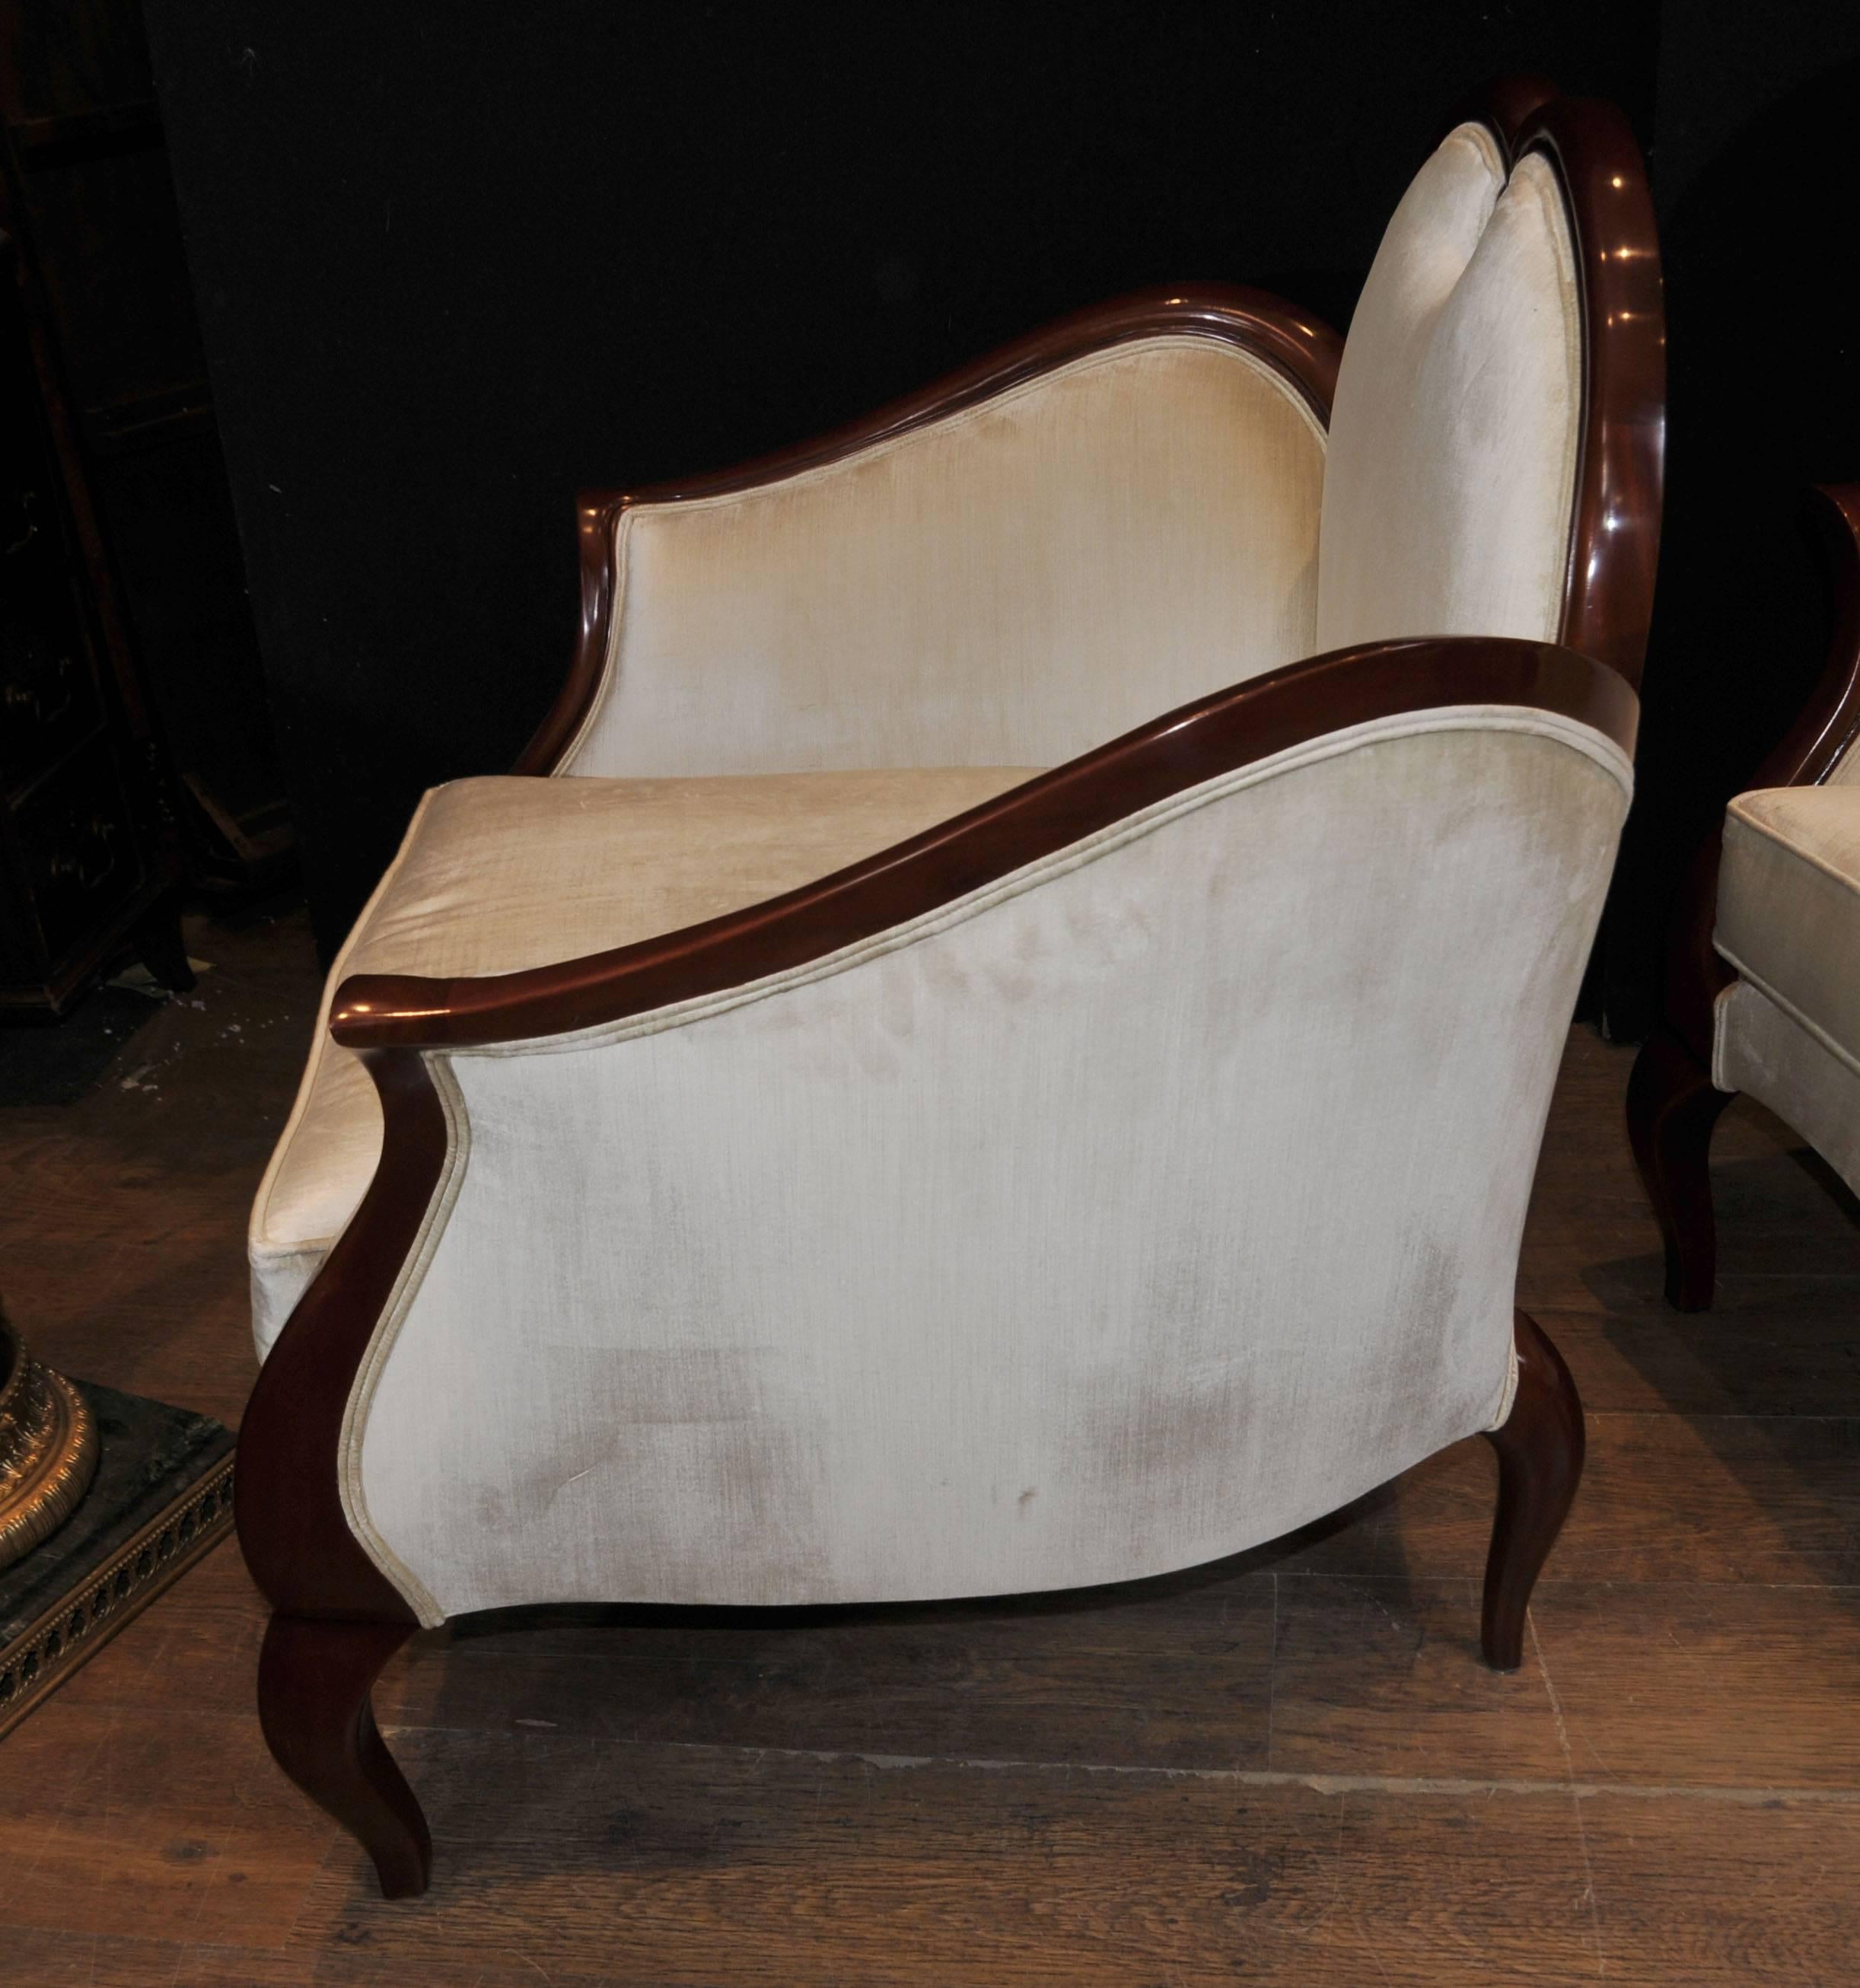 French Empire Style Heart Arm Chairs Fauteils Regency Furniture In Good Condition For Sale In Potters Bar, Herts